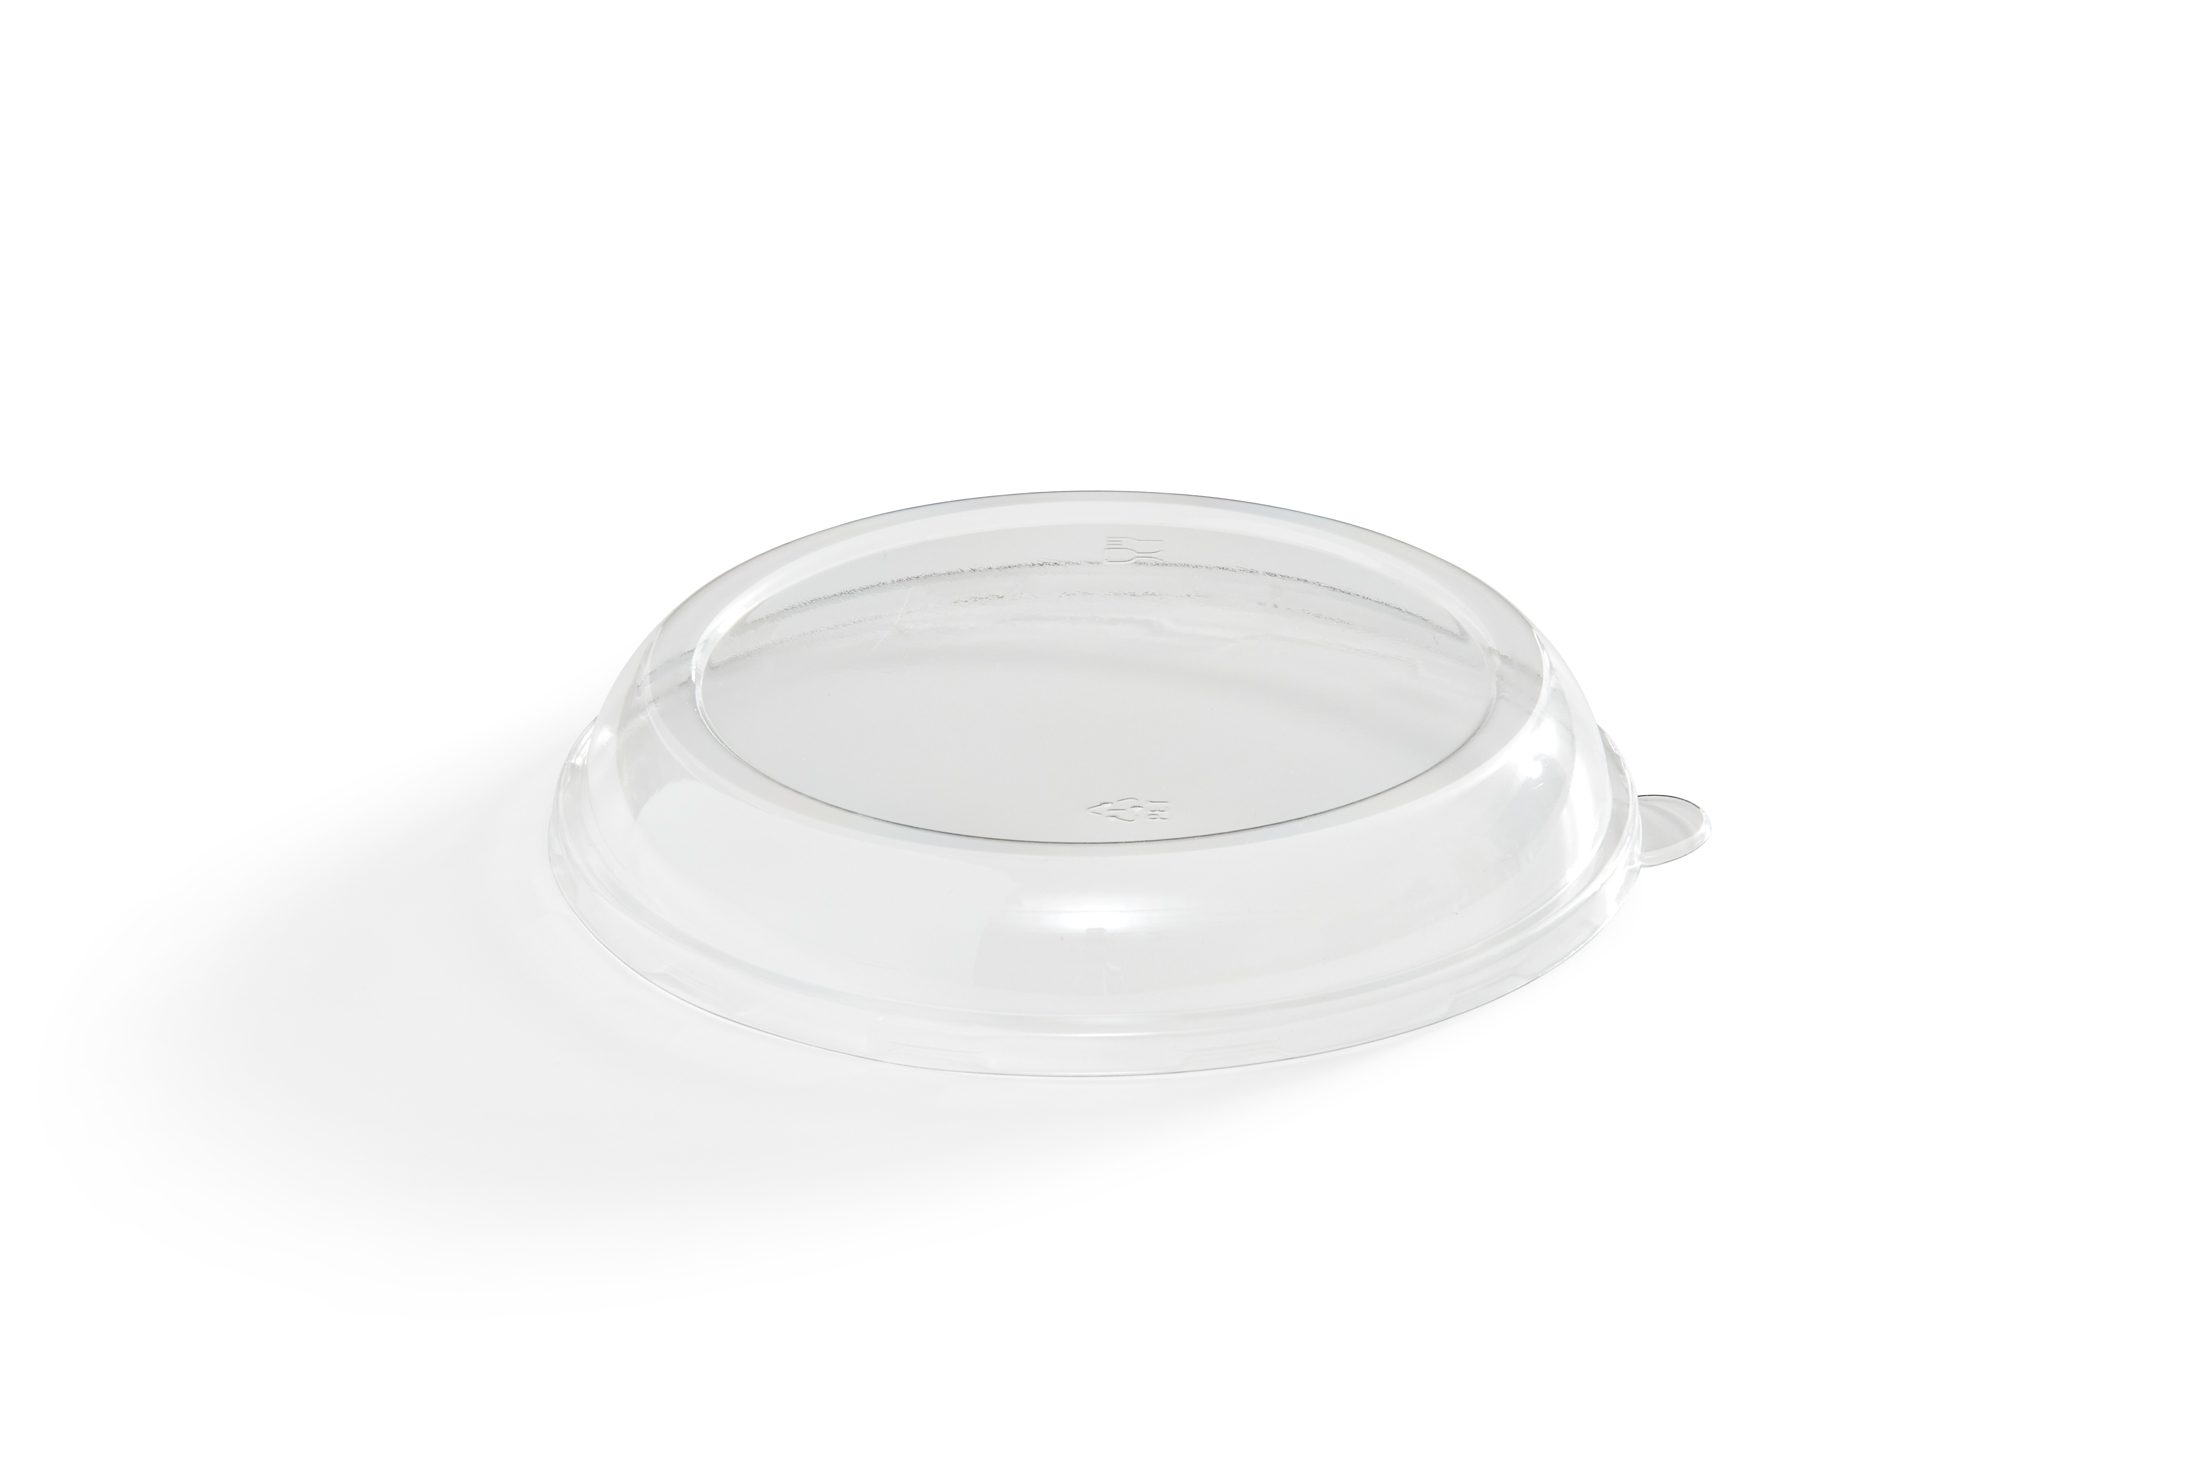 Choice 32 oz. Clear Plastic Dome Lid with Hole - 500/Case